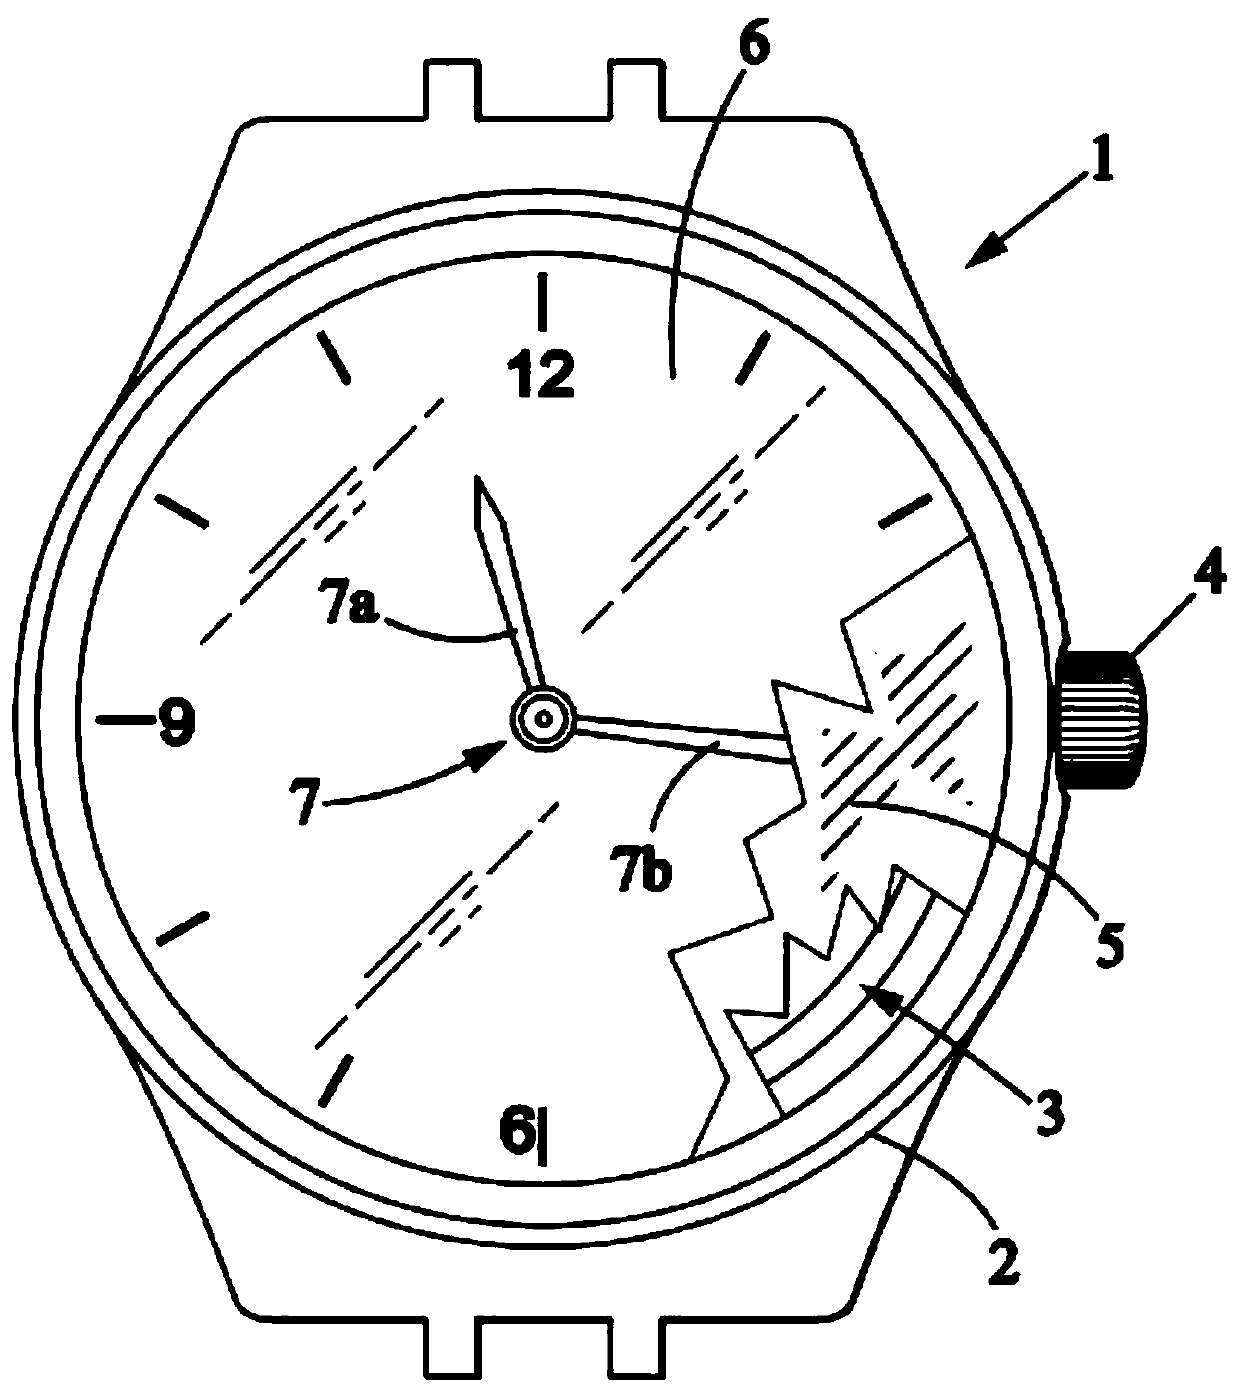 Clockwork component, clockwork, timepiece, and method for manufacturing a clockwork component of said type